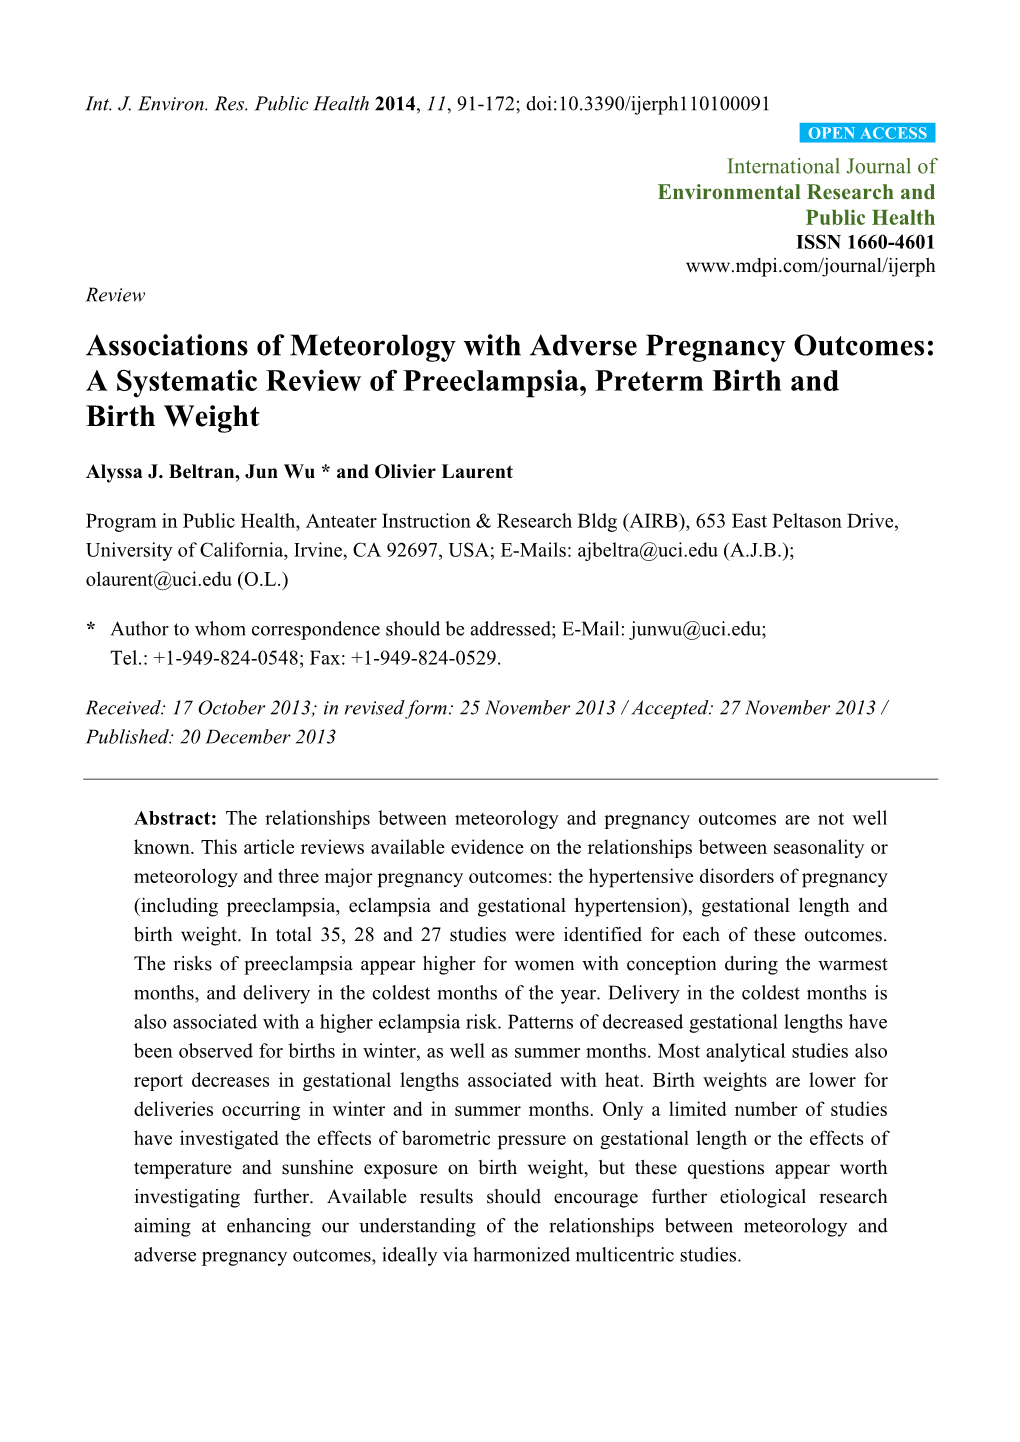 A Systematic Review of Preeclampsia, Preterm Birth and Birth Weight